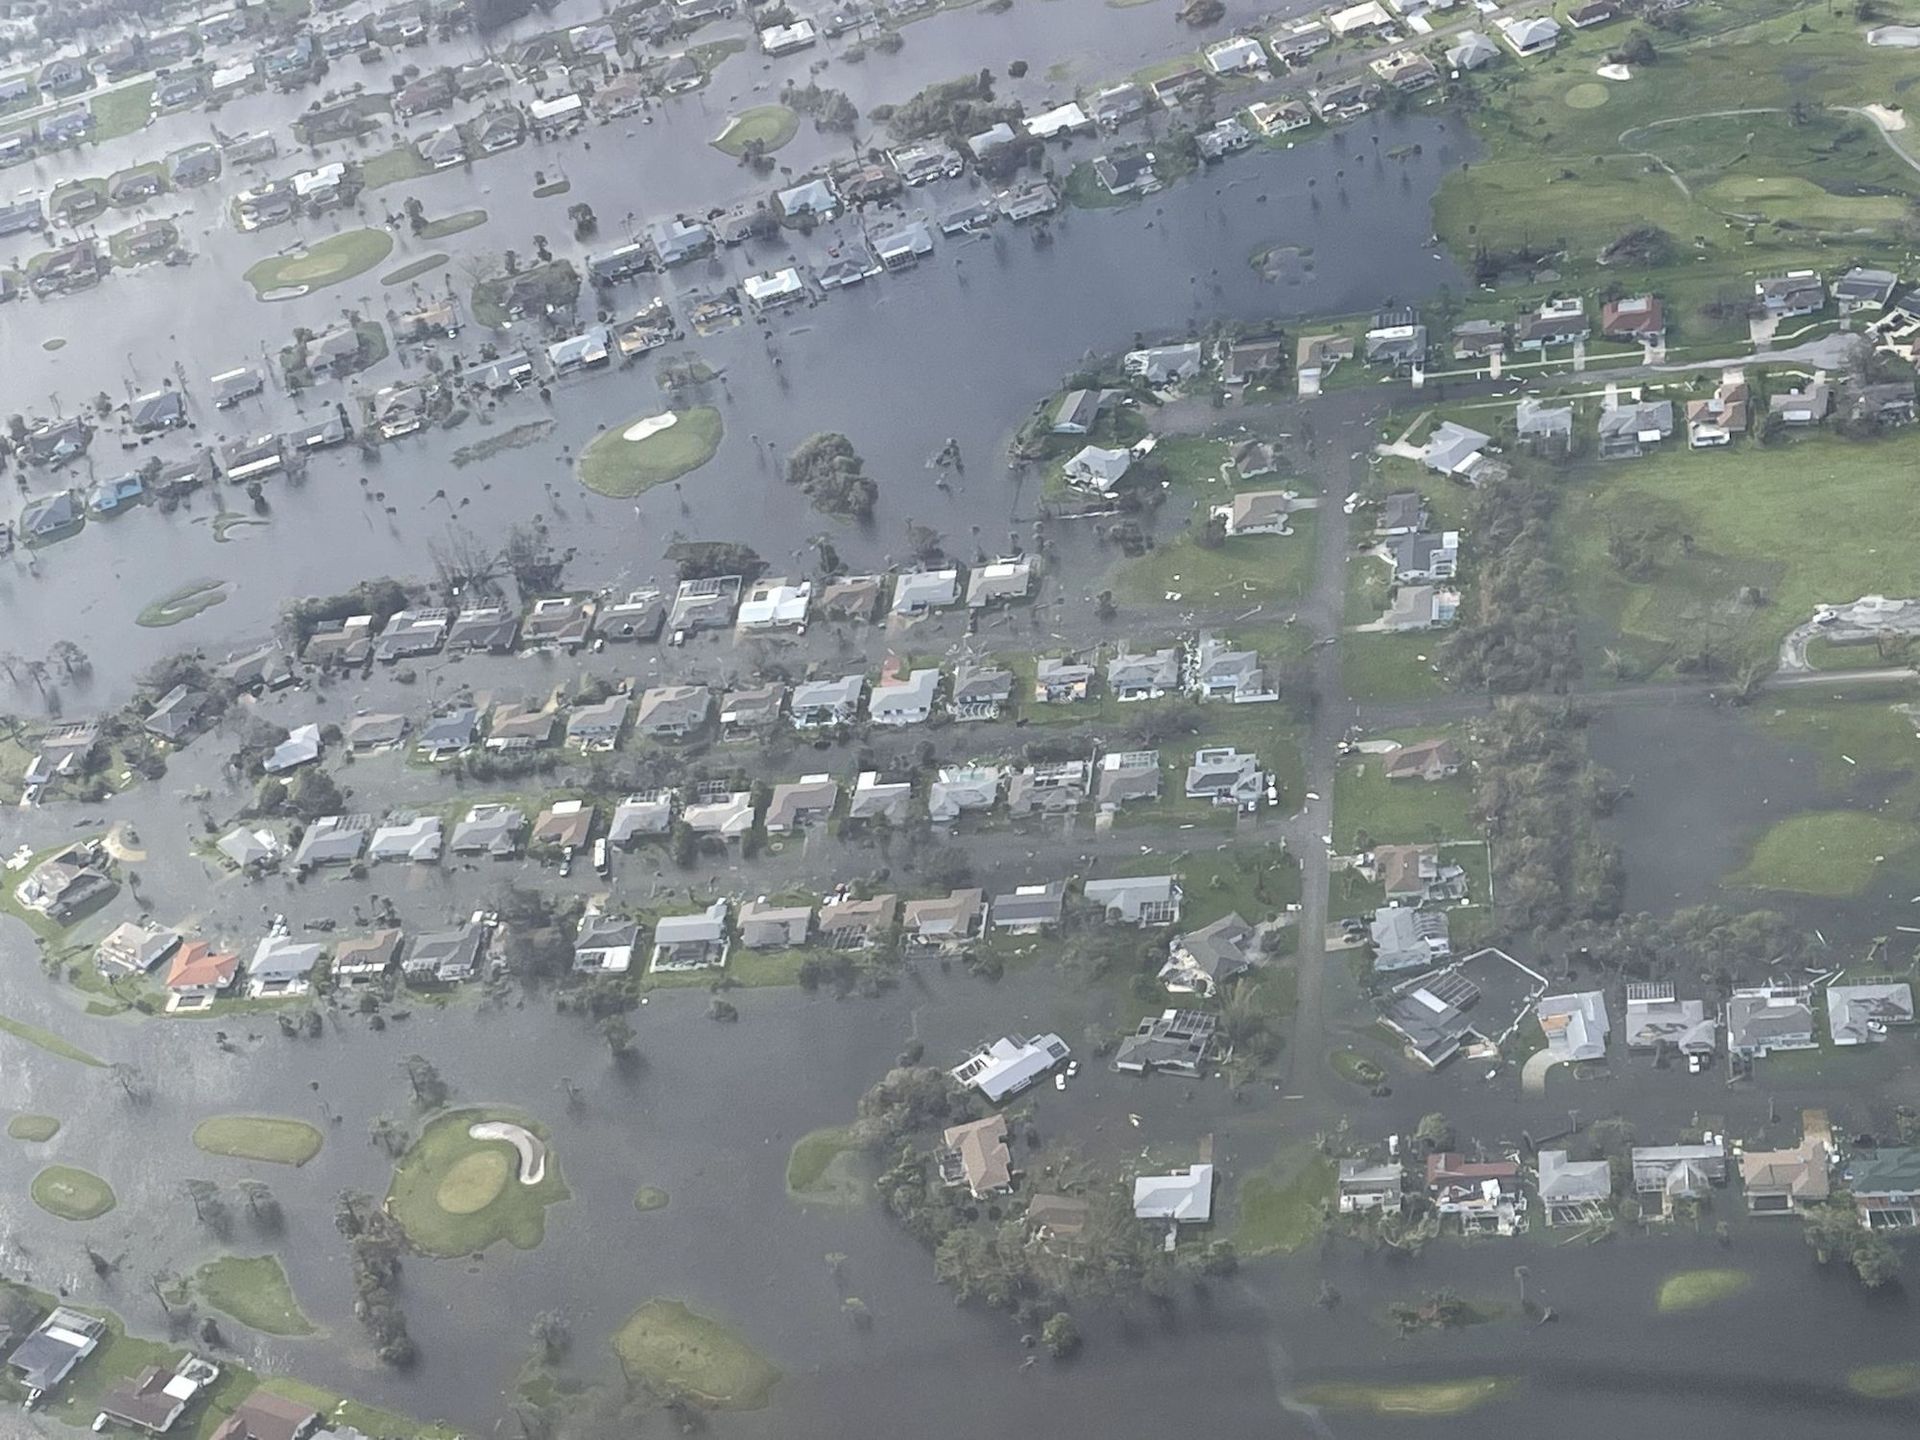 Flooding in the Fort Myers area, as seen from a Coast Guard aircraft surveying damage from Hurricane Ian on 29 September. US Coast Guard photo by Petty Officer 3rd Class Kruz Sanders, via Flickr.